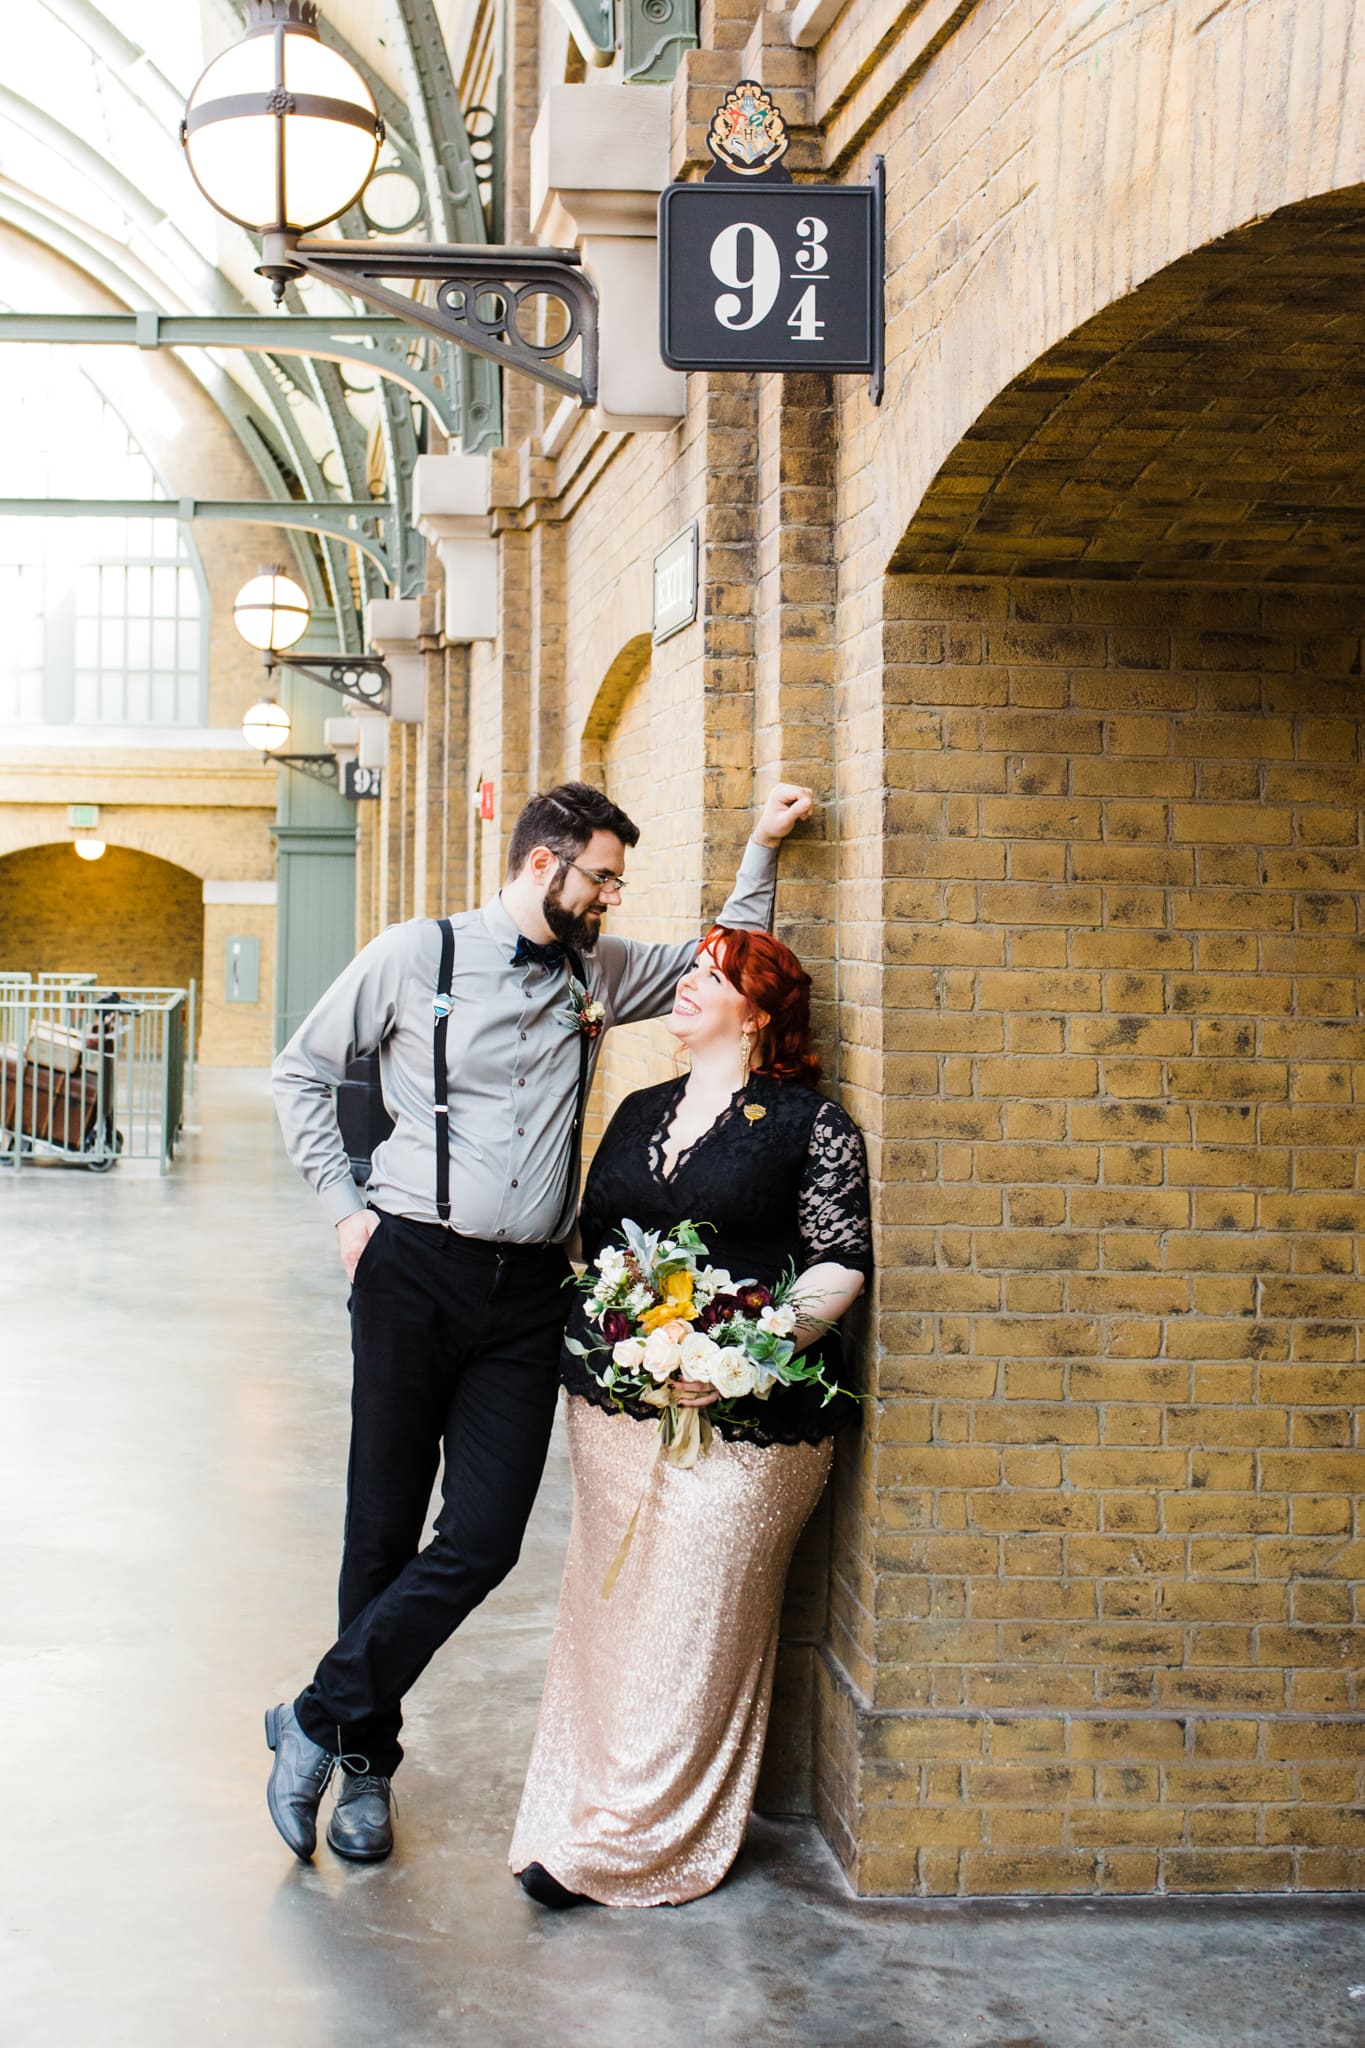 Couple standing underneath 9 3/4 platform sign at Hogwarts Universal Orlando waiting for the train for Hogwarts vow renewal